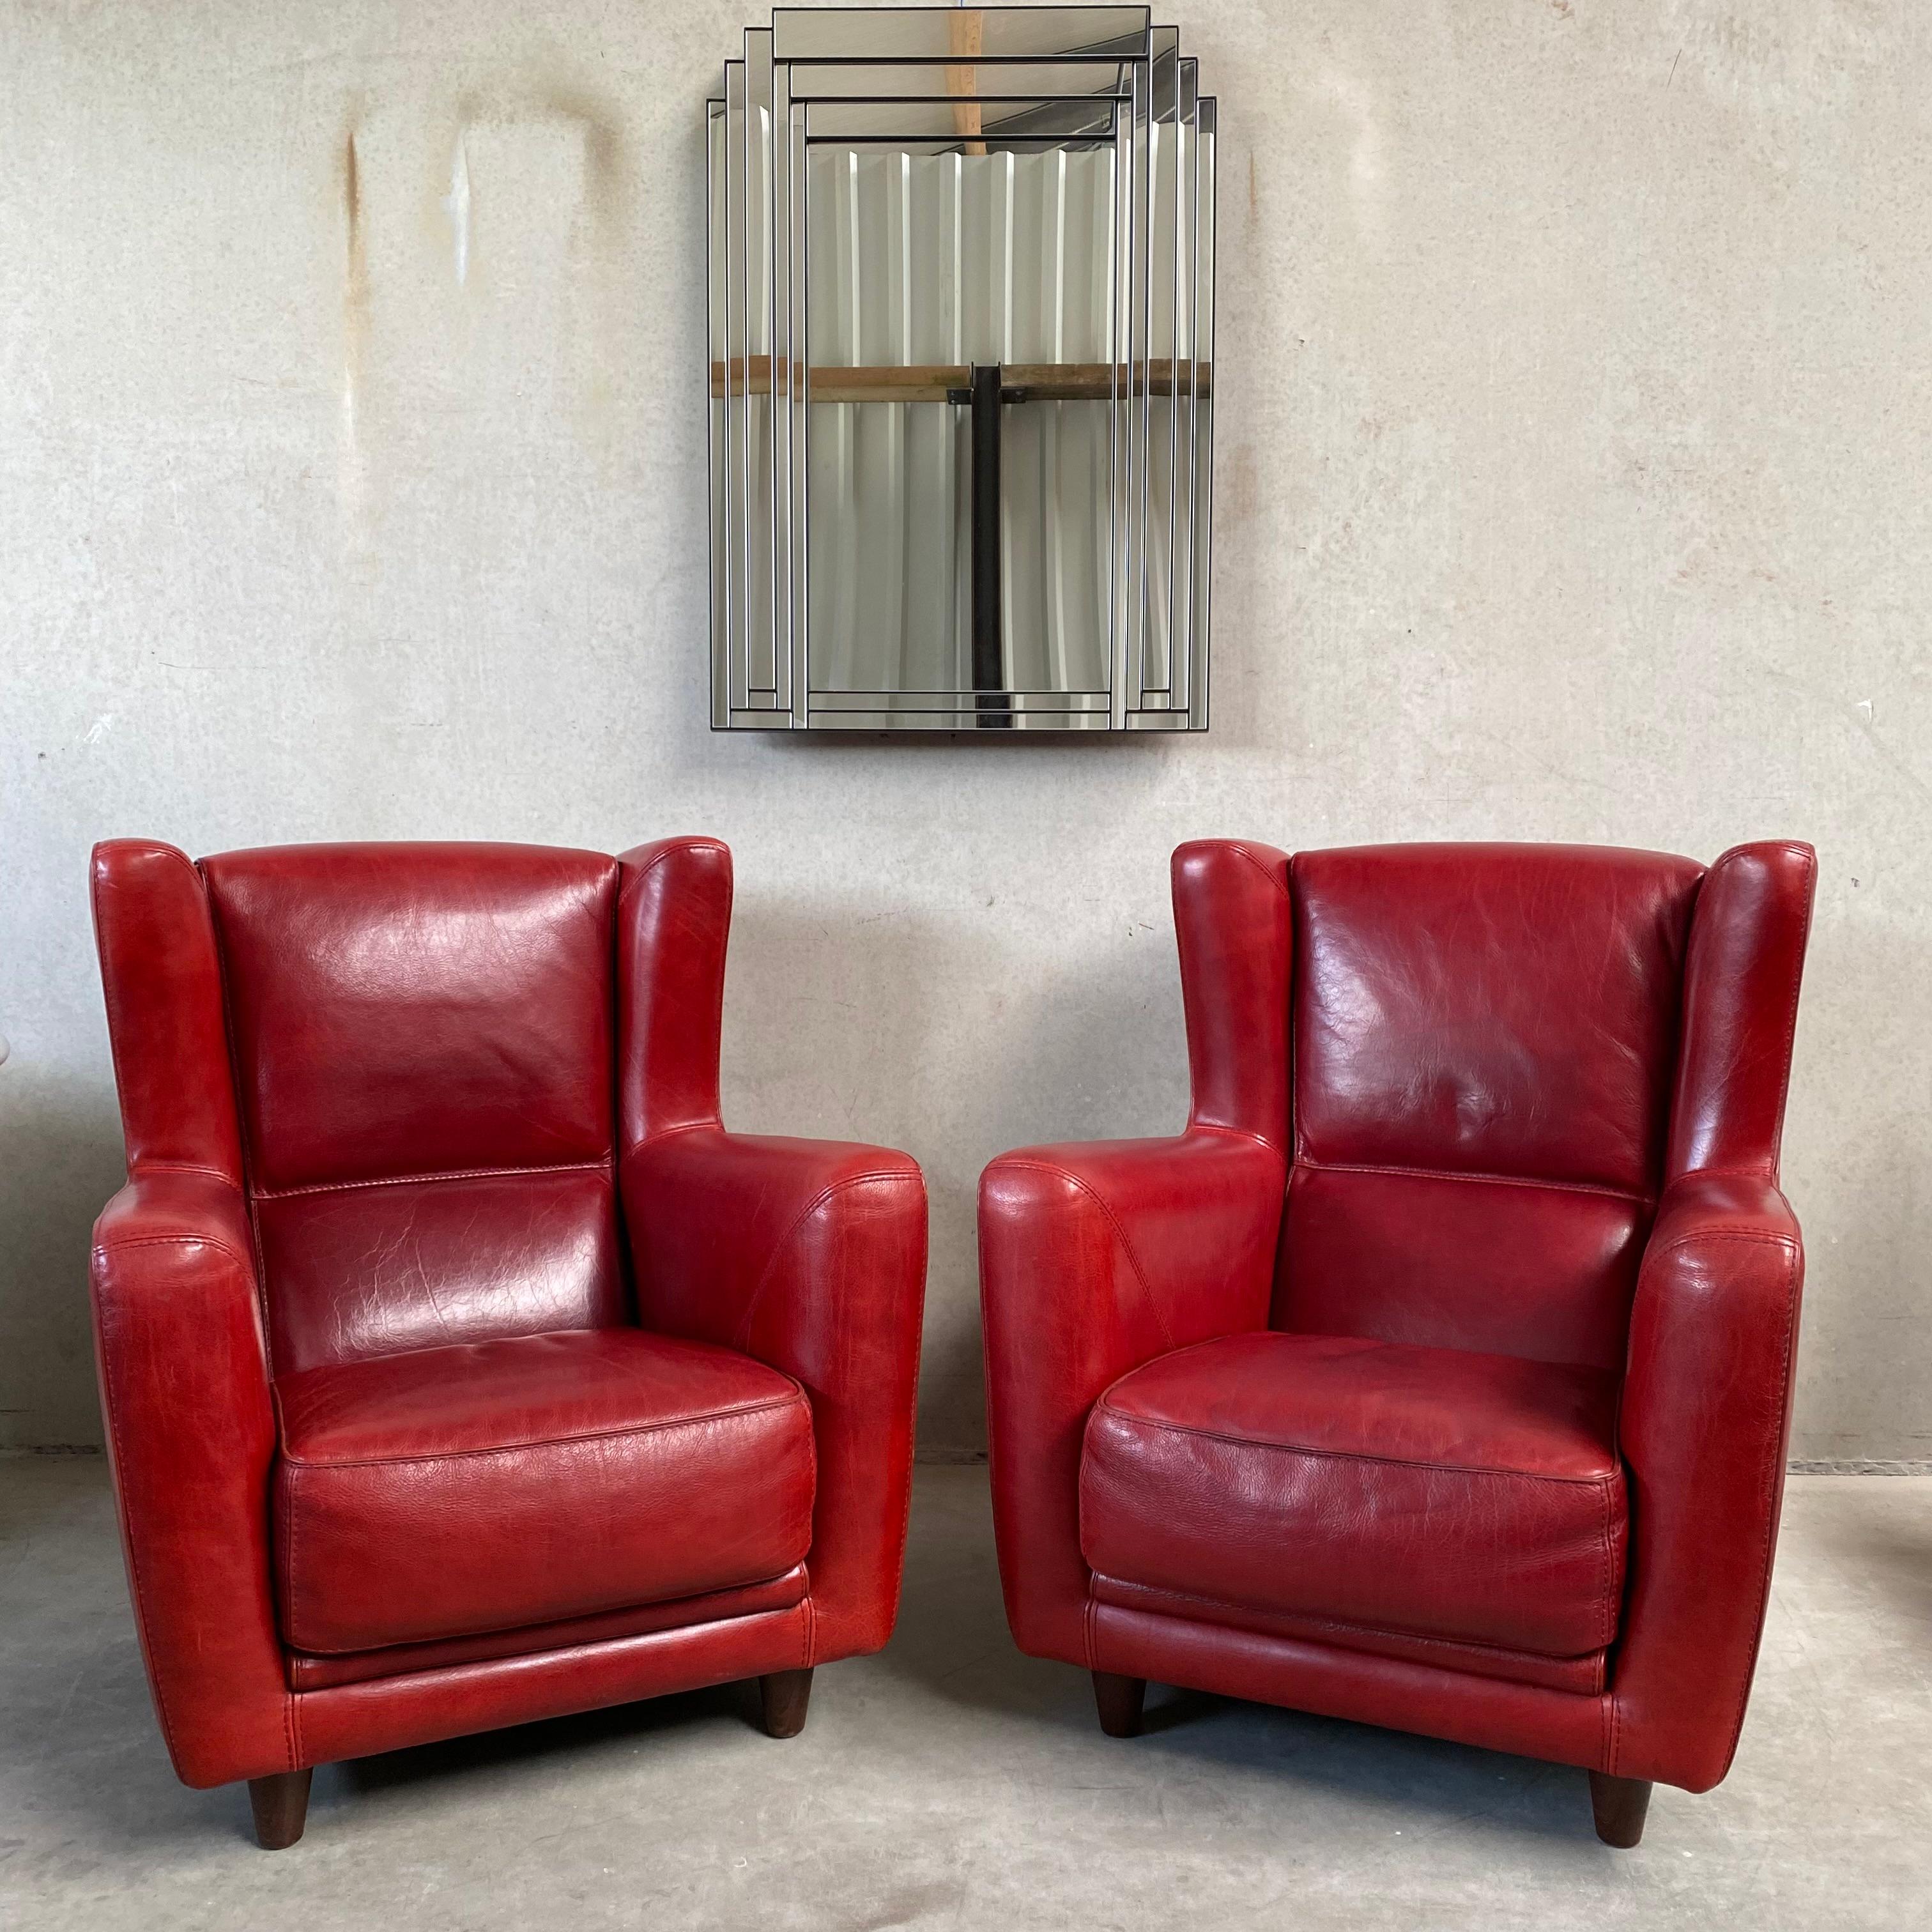 Pair of Ox-Blood Red Leather Lounge Chairs Begére by Baxter Italy 90s For Sale 13